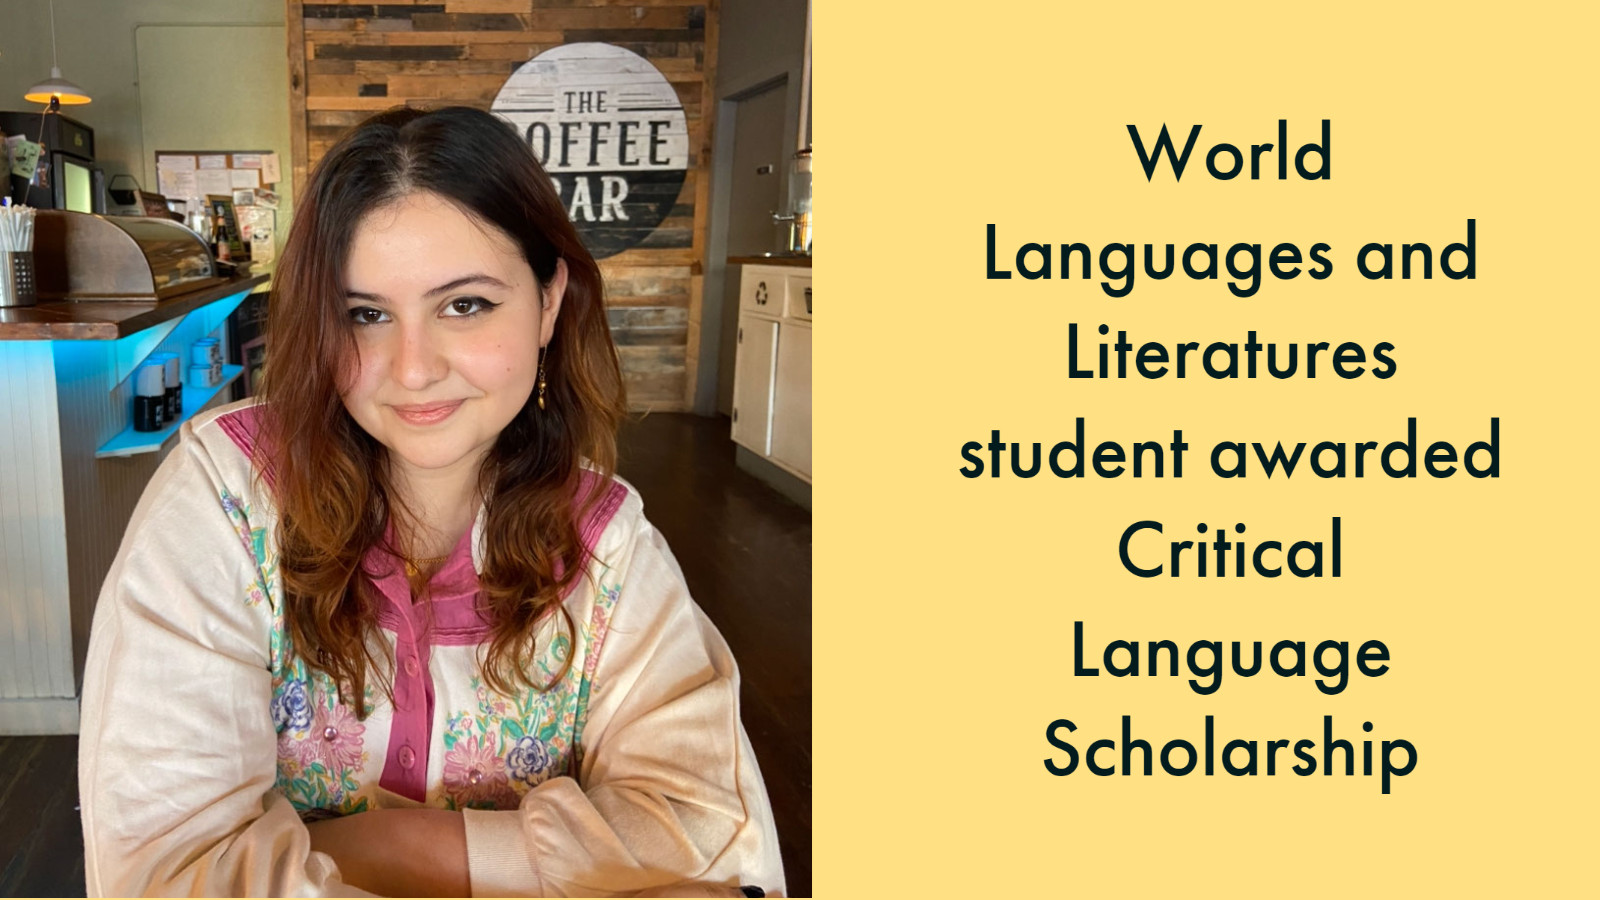 woman with brownish-red hair sitting in a coffee shop, text: World Languages and Literatures student awarded Critical Language Scholarship